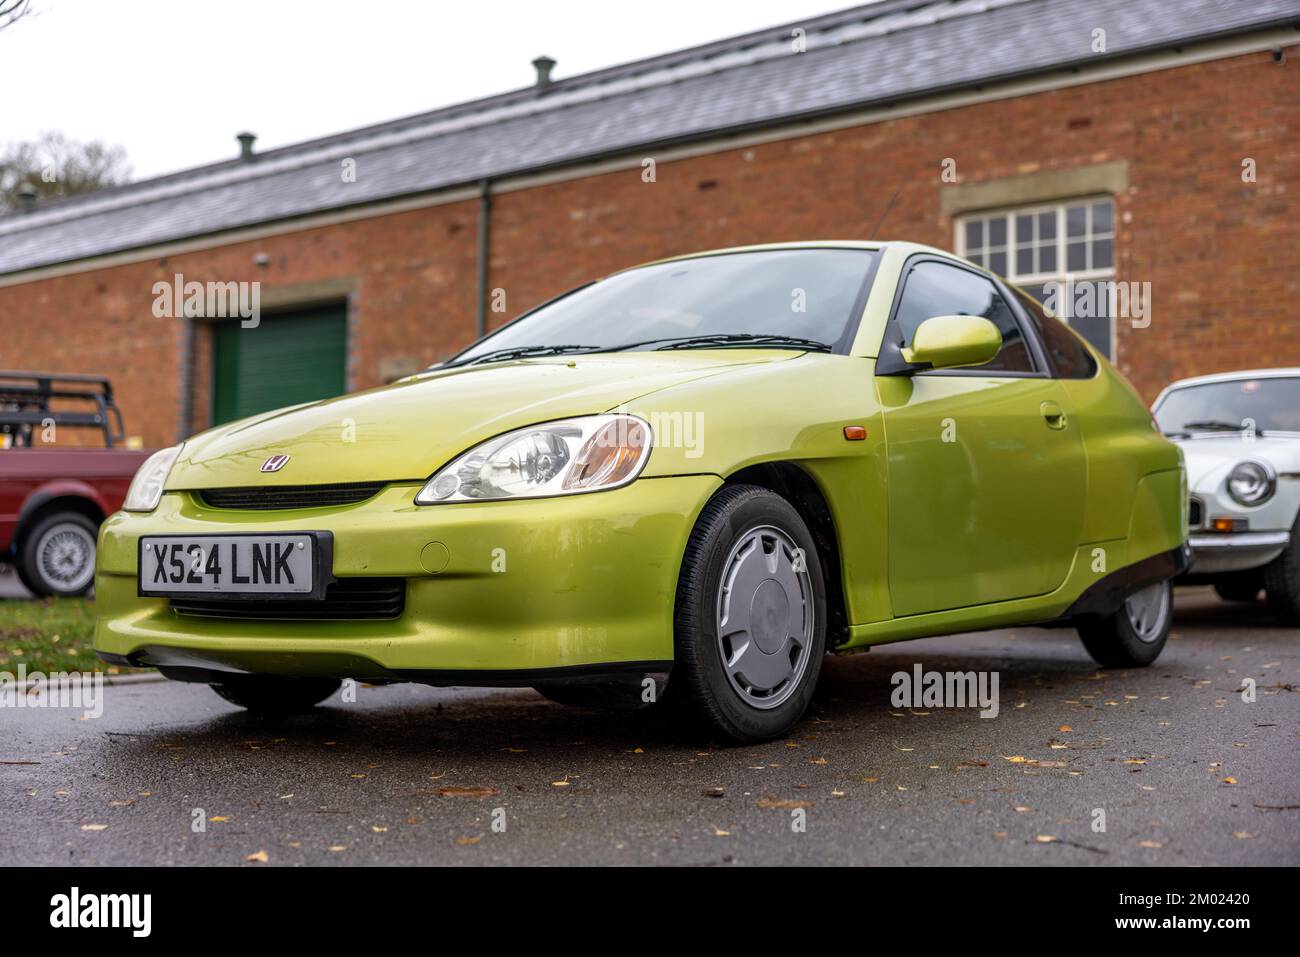 2001 Honda Insight ‘X524 LNK’ on display at the Workhorse Assembly held at the Bicester Heritage Centre on the 27th November 2022 Stock Photo